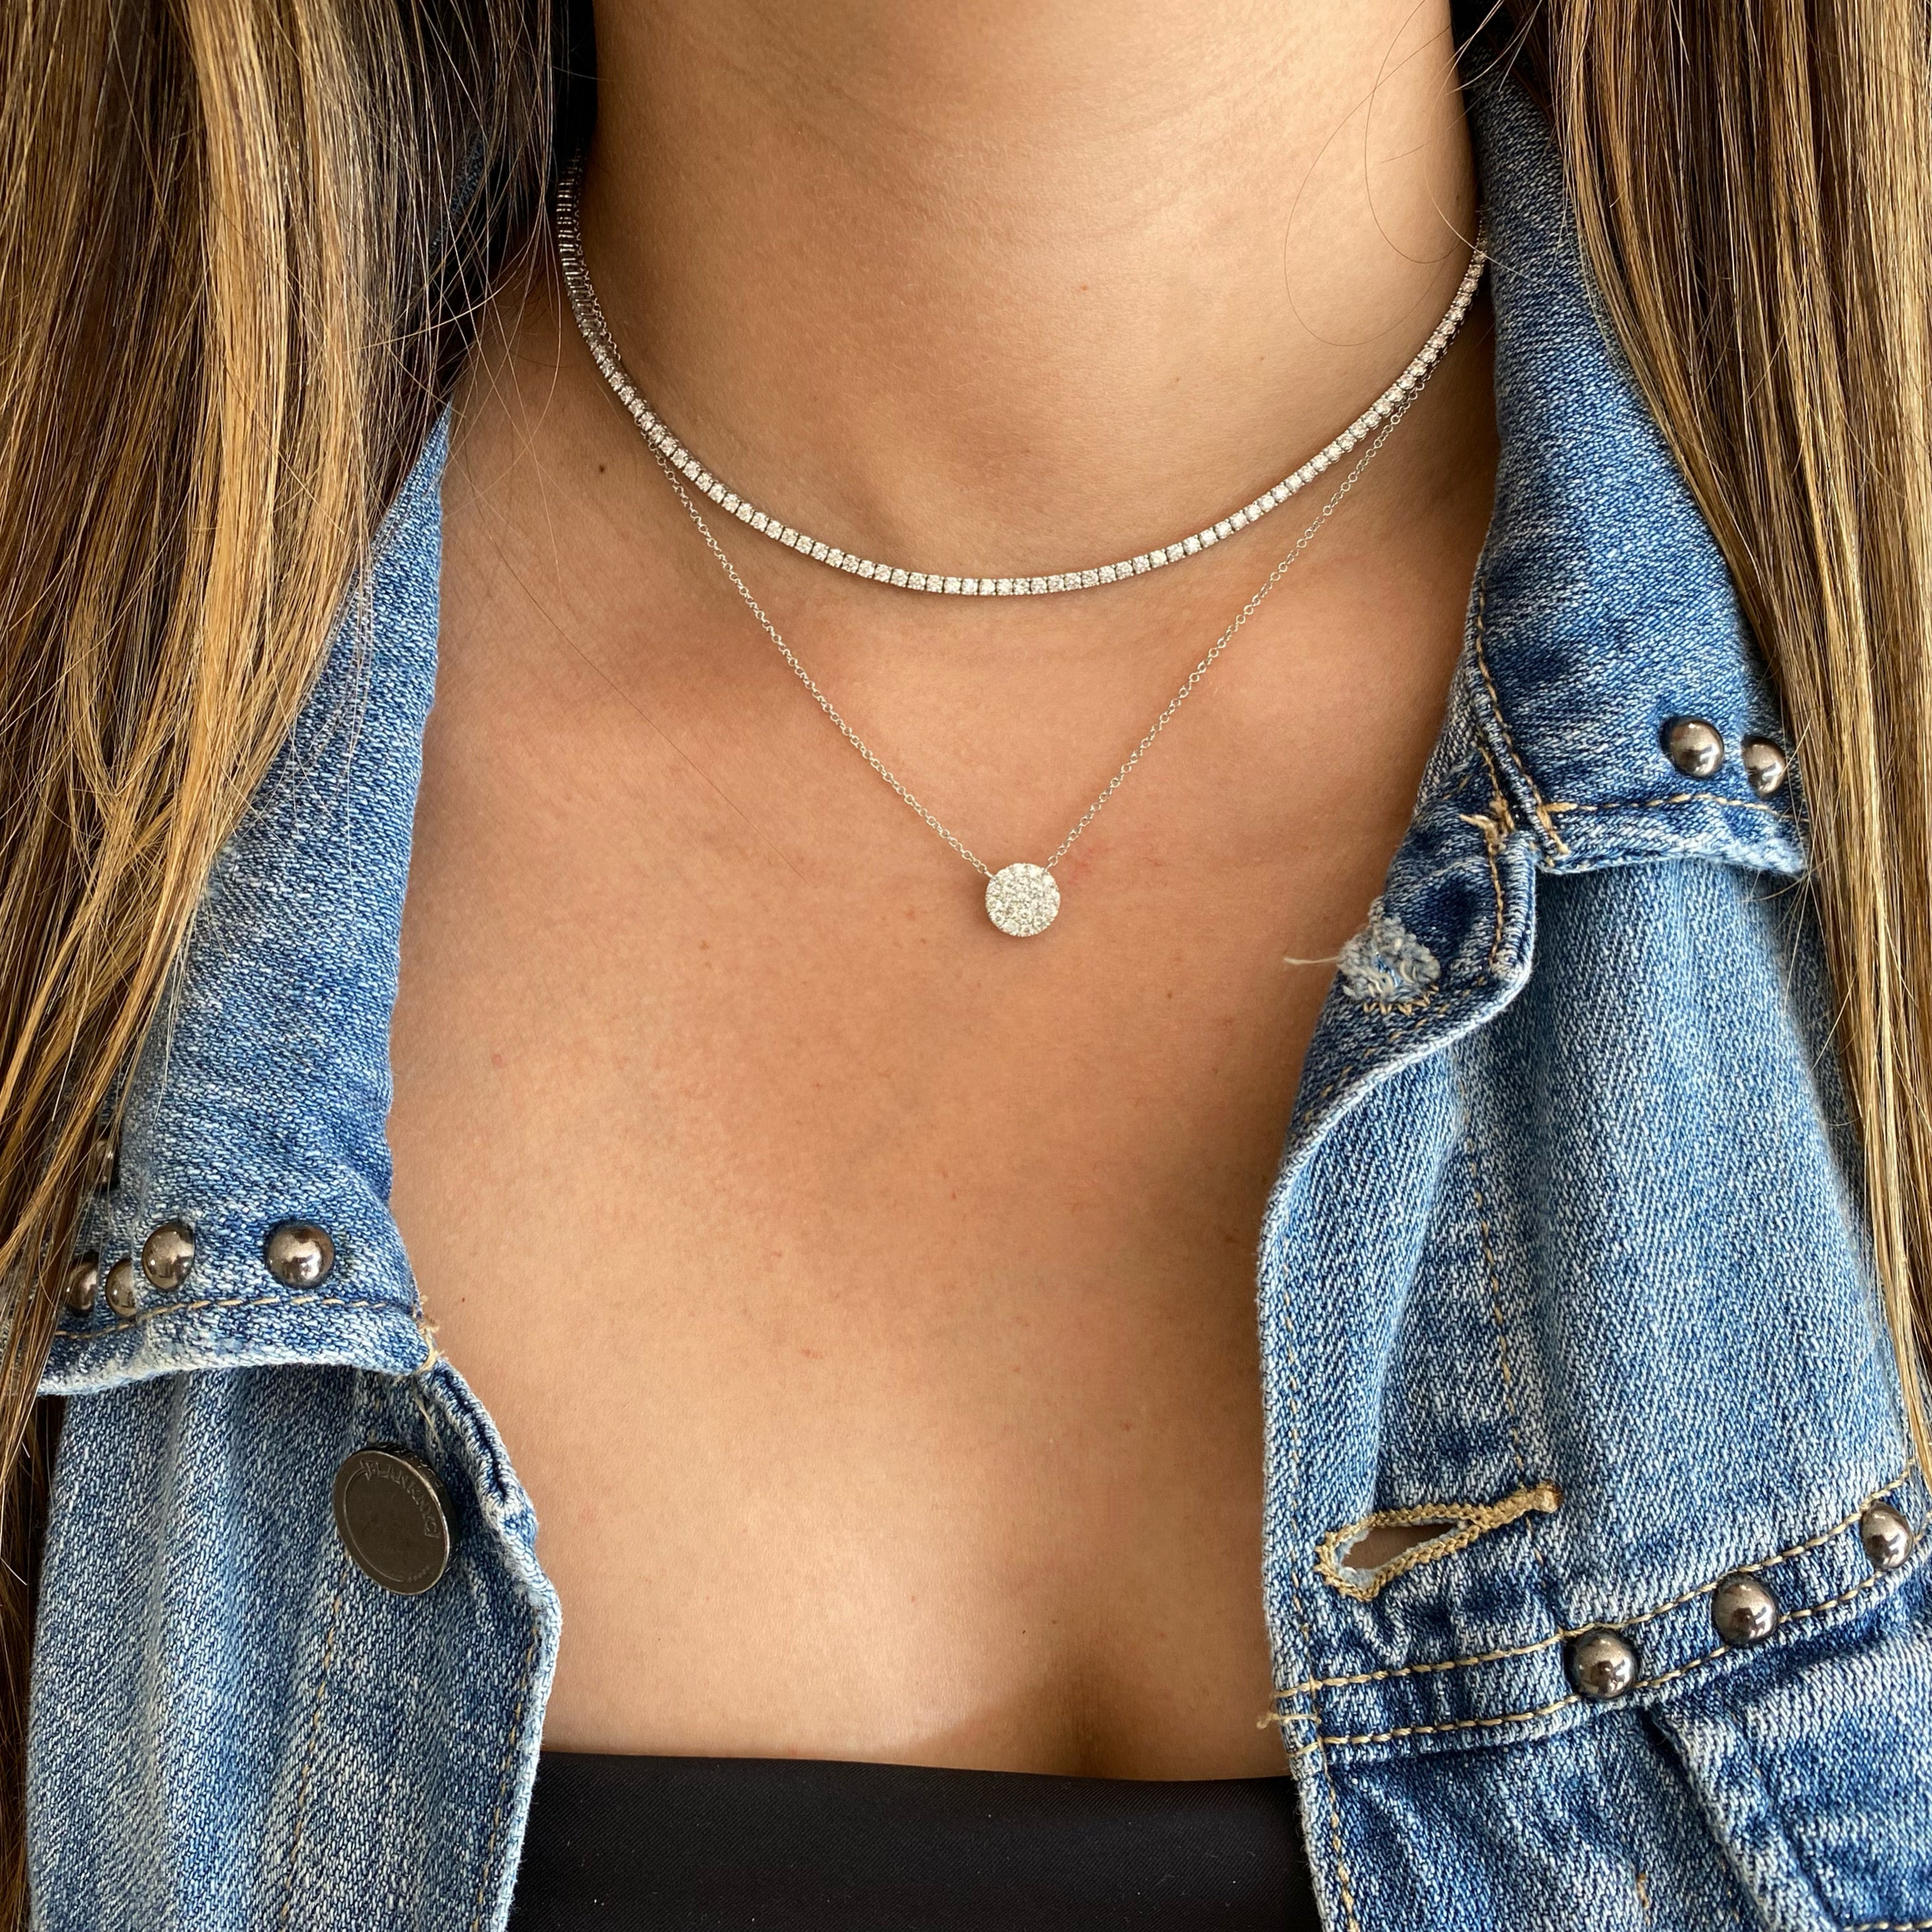 Linked Circles Necklace | Sister necklace, Silver, Necklace